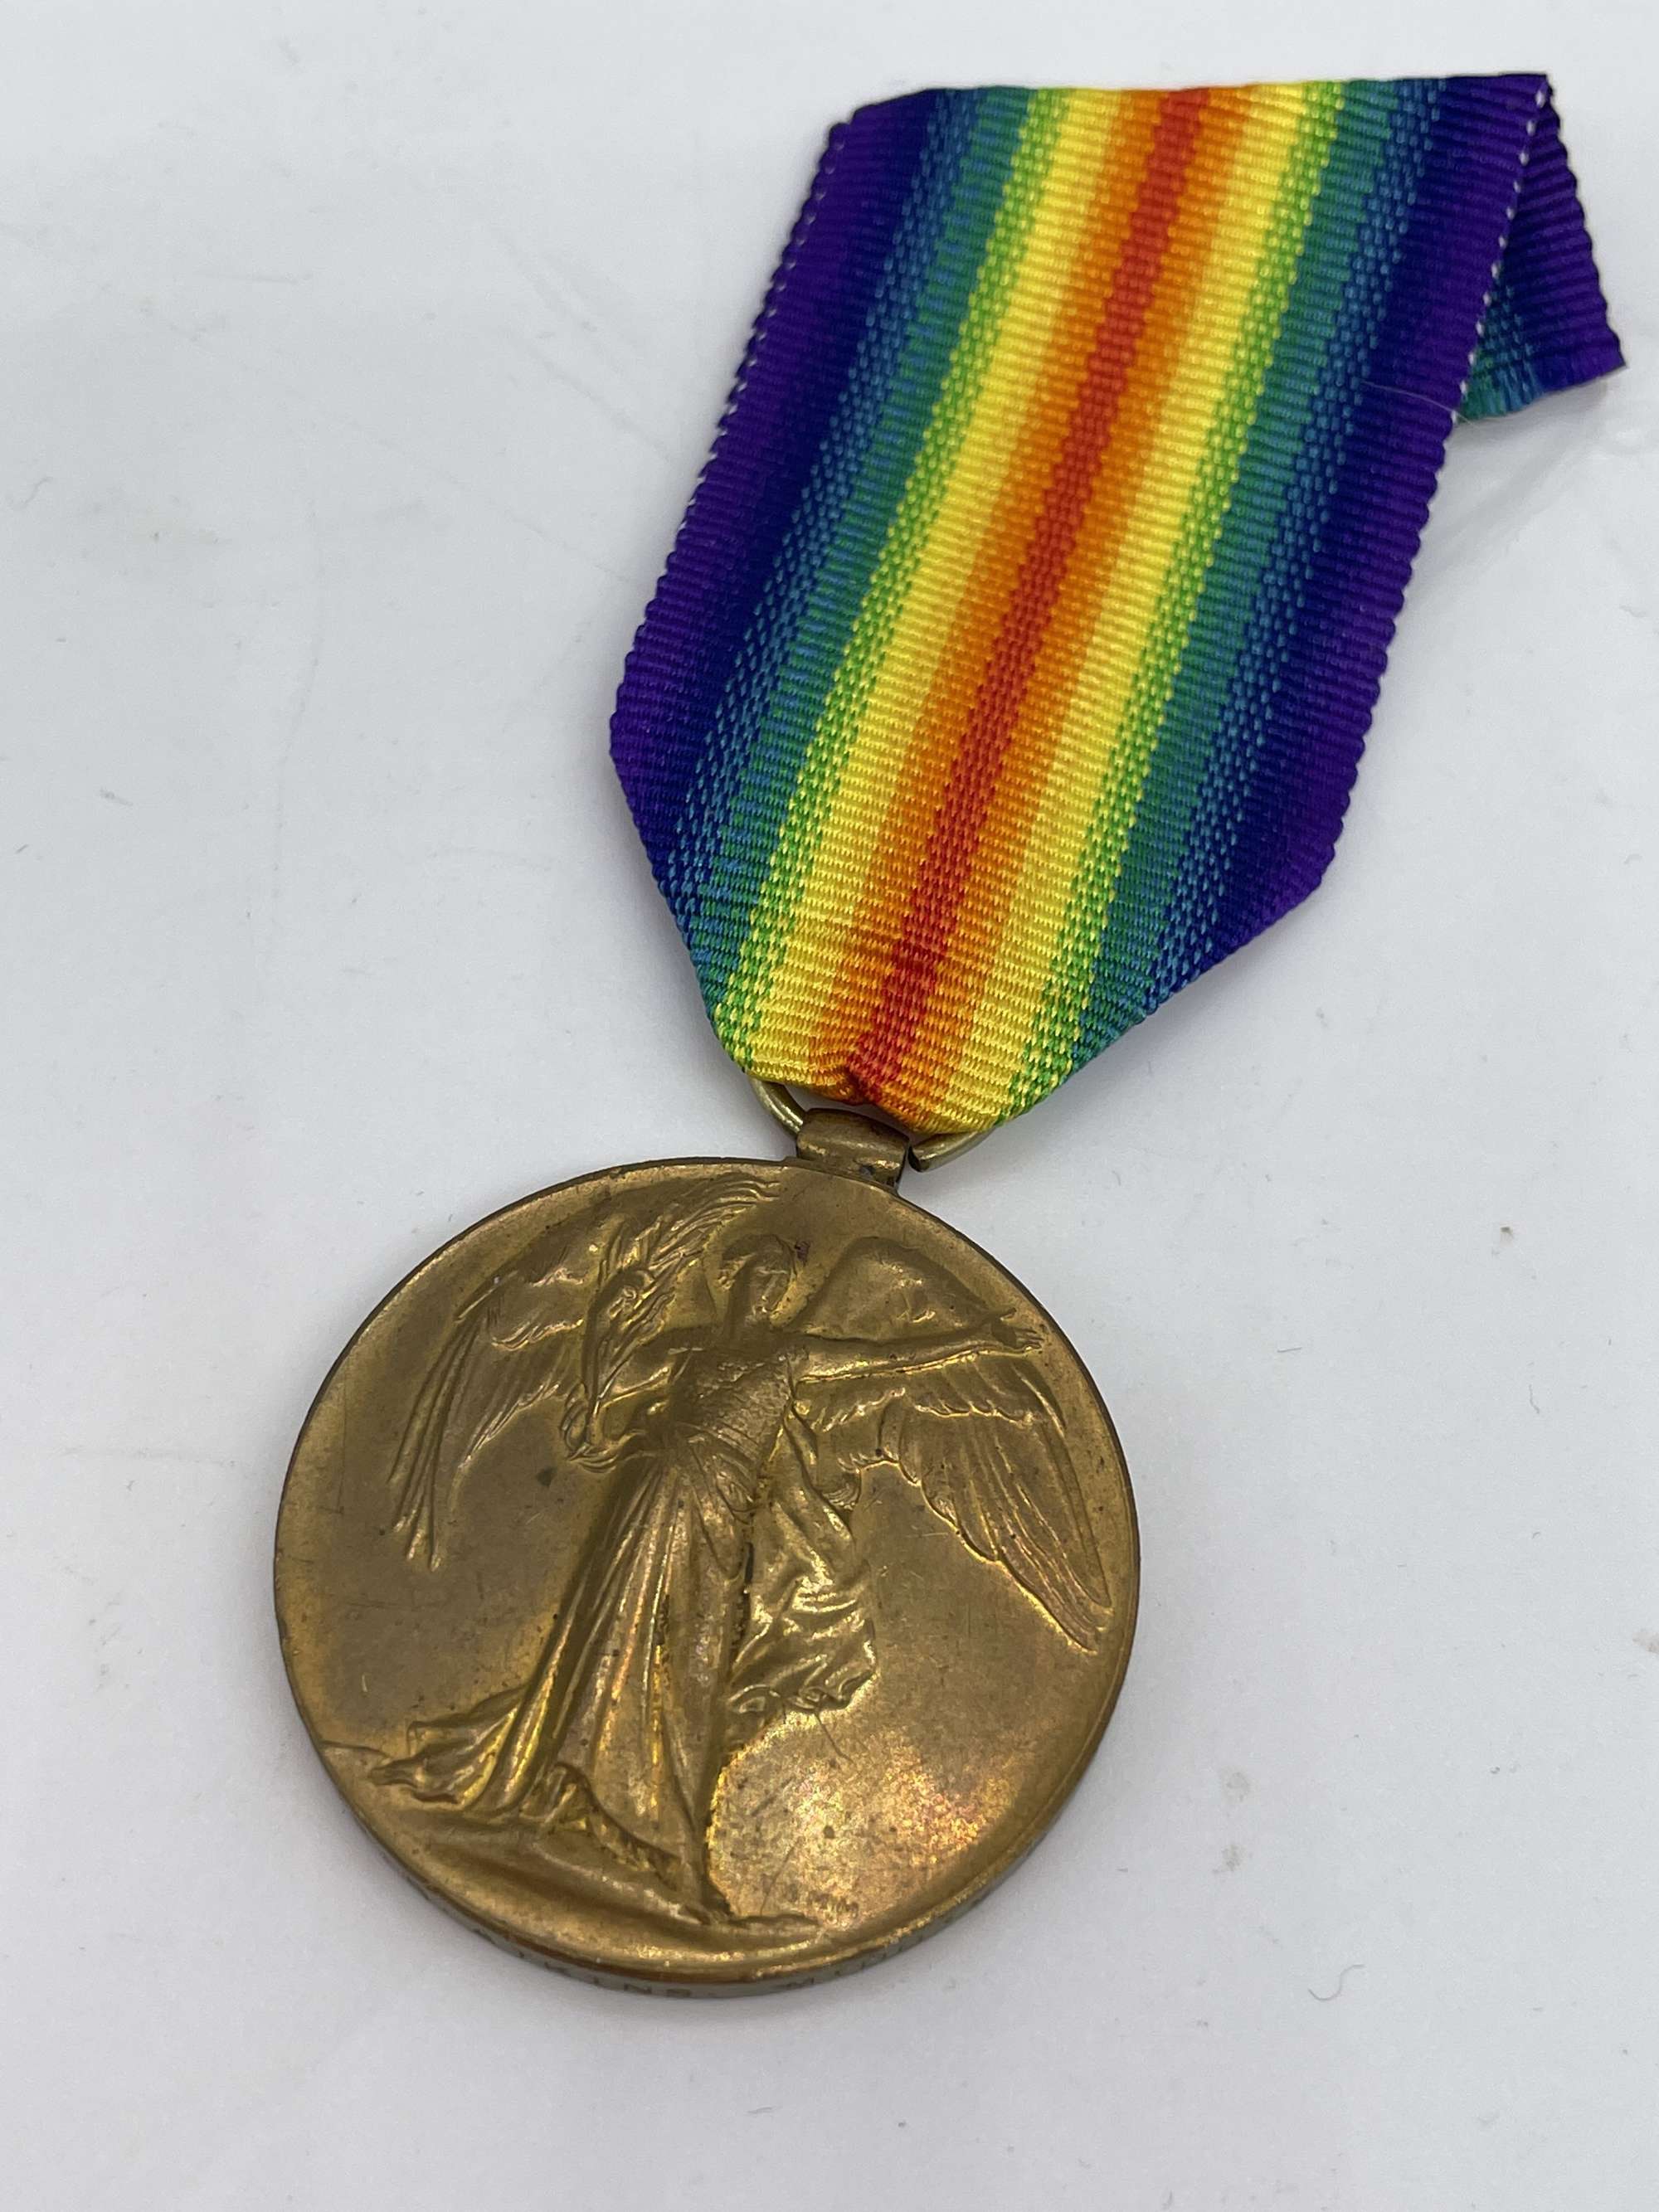 Original World War One Victory Medal, Pte Atkins, Middlesex Regiment, Died of Wounds